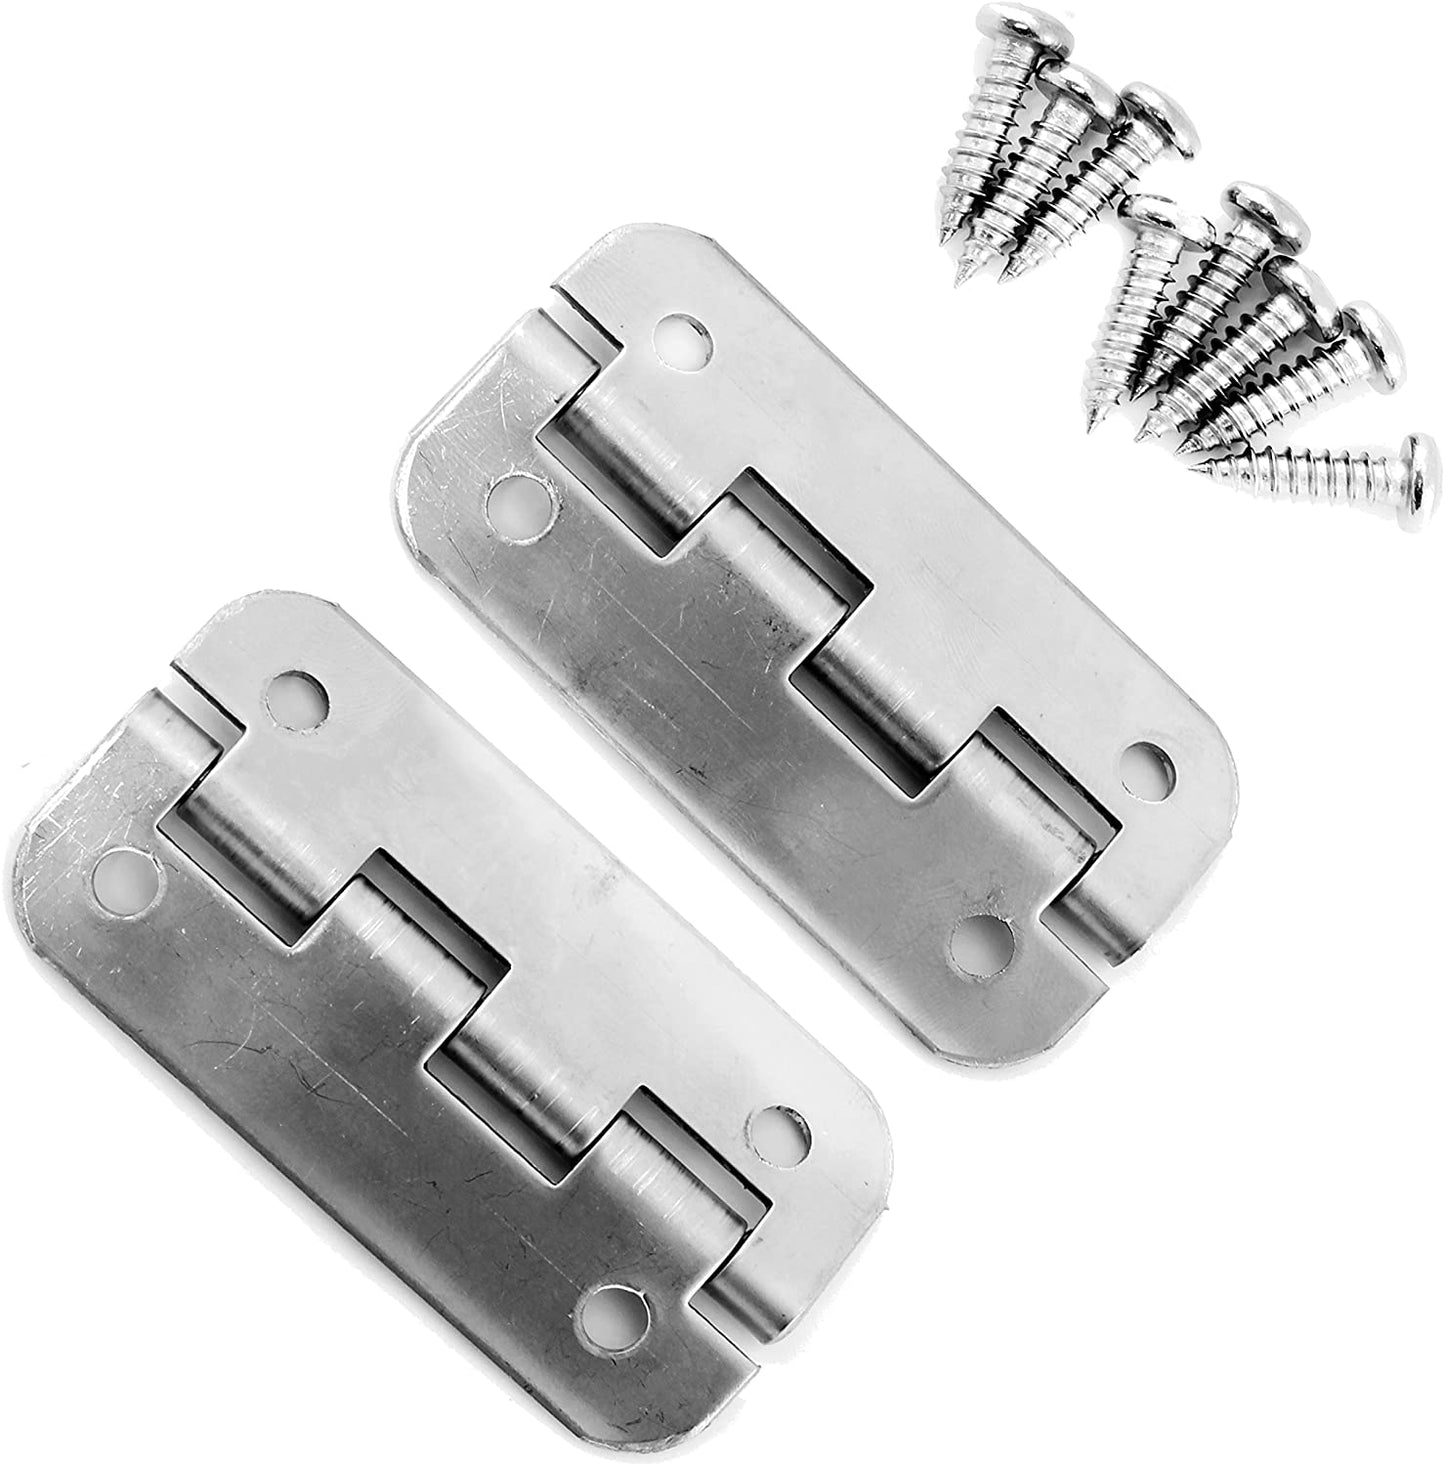 Stainless Steel Replacement Cooler Hinges, Igloo-Compatible - sh659cb0Igloo